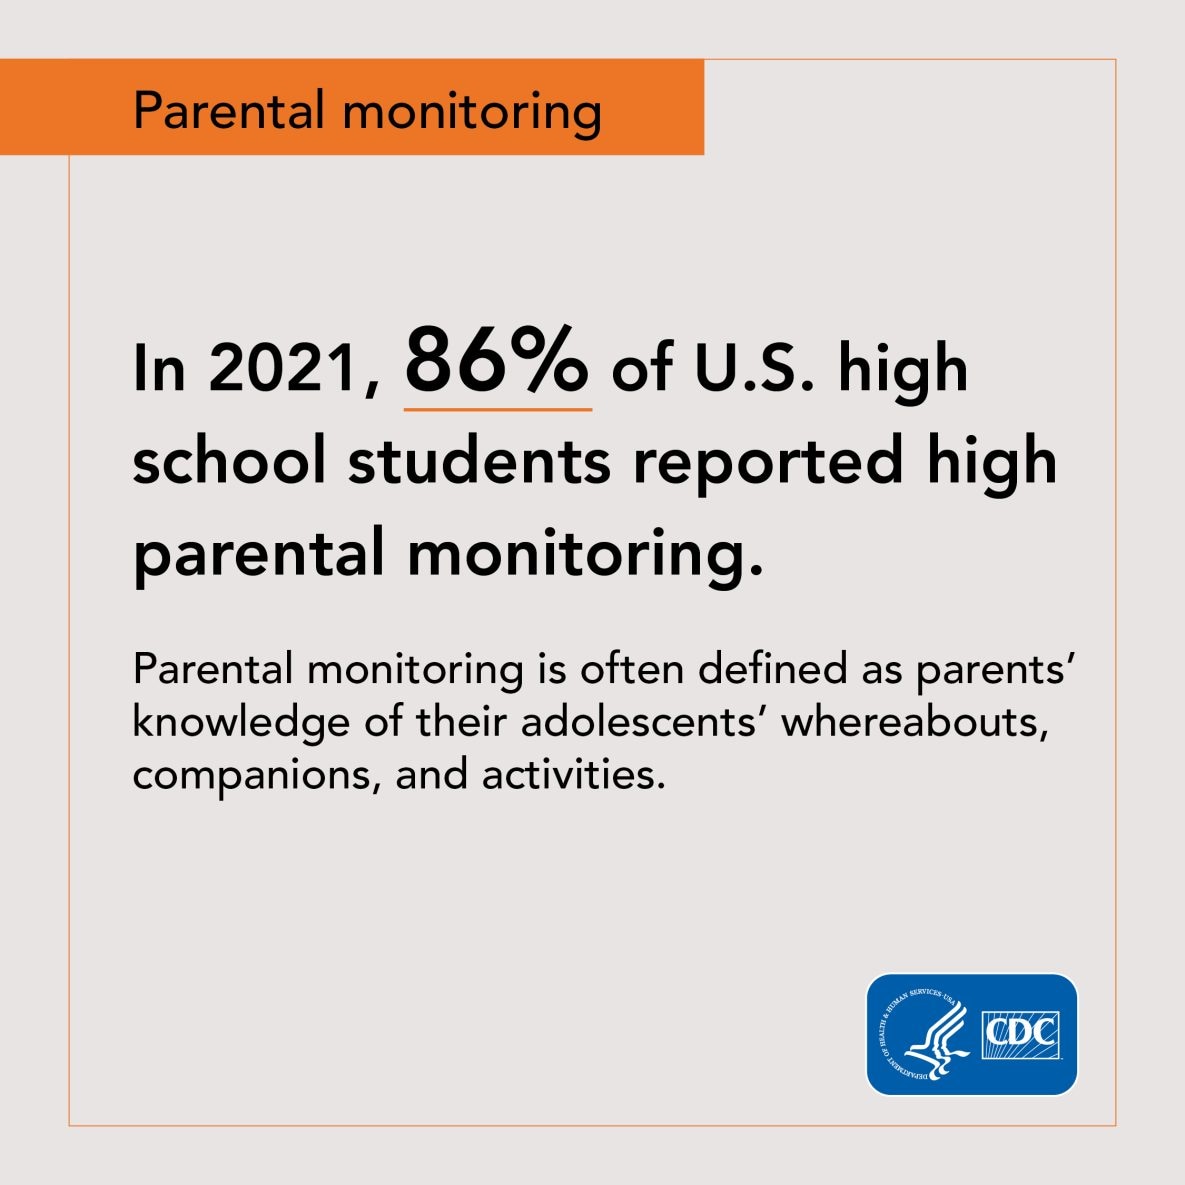 YRBS Data-Specific_Graphic_1080x1080_Parental Monitoring_Text only